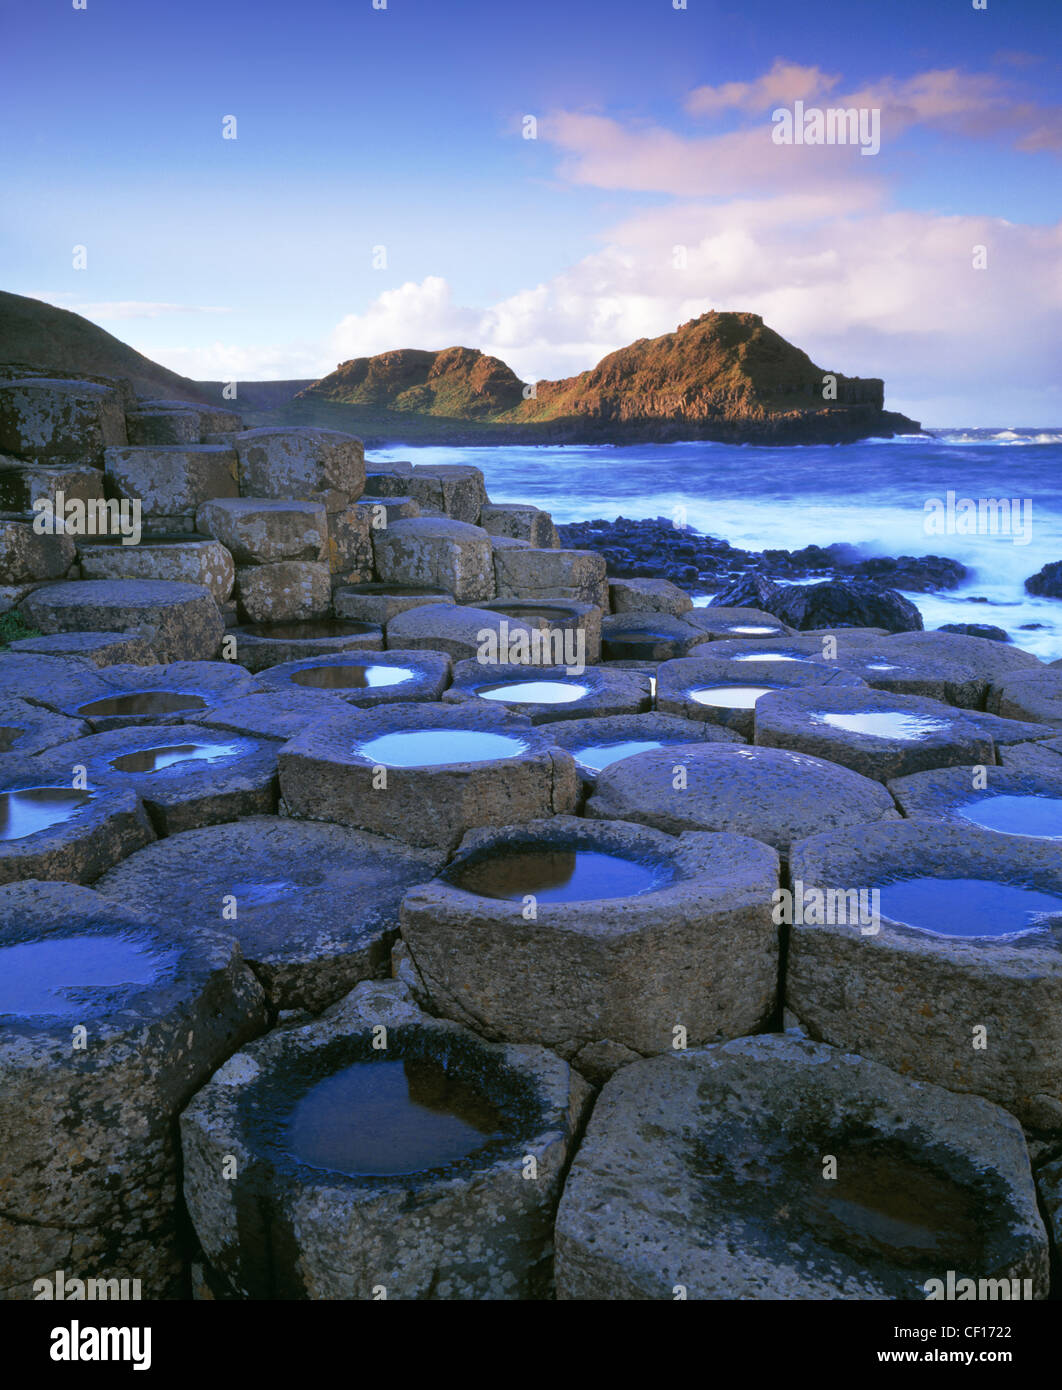 A view of the Giants Causeway in County Antrim Northern Ireland. Stock Photo